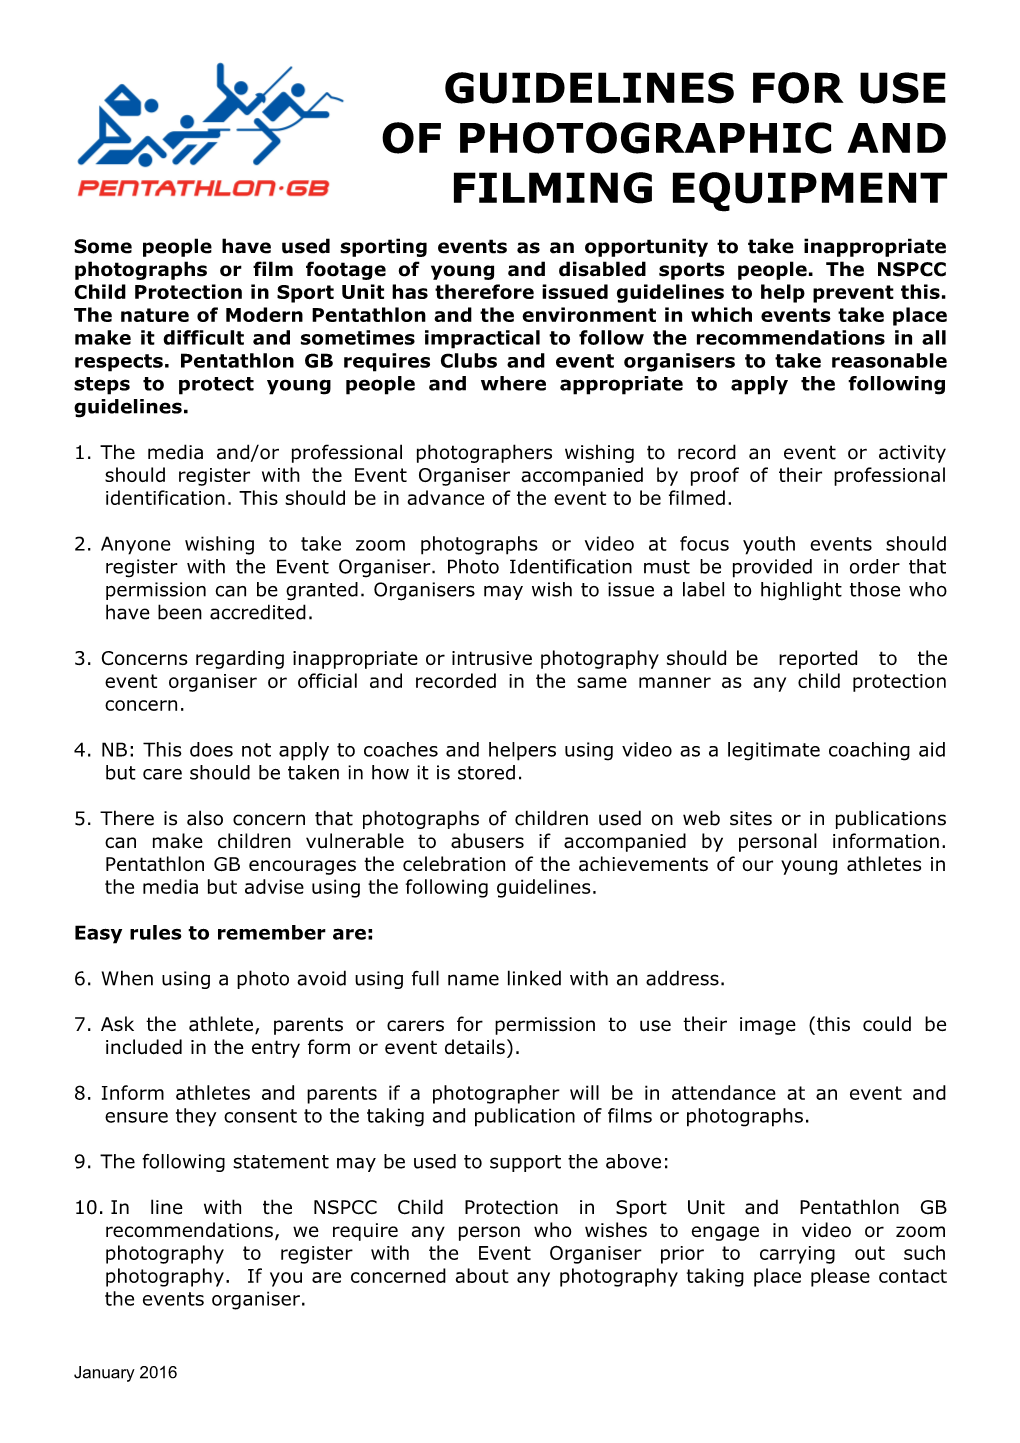 Guidelines for Use of Photographic and Filming Equipment